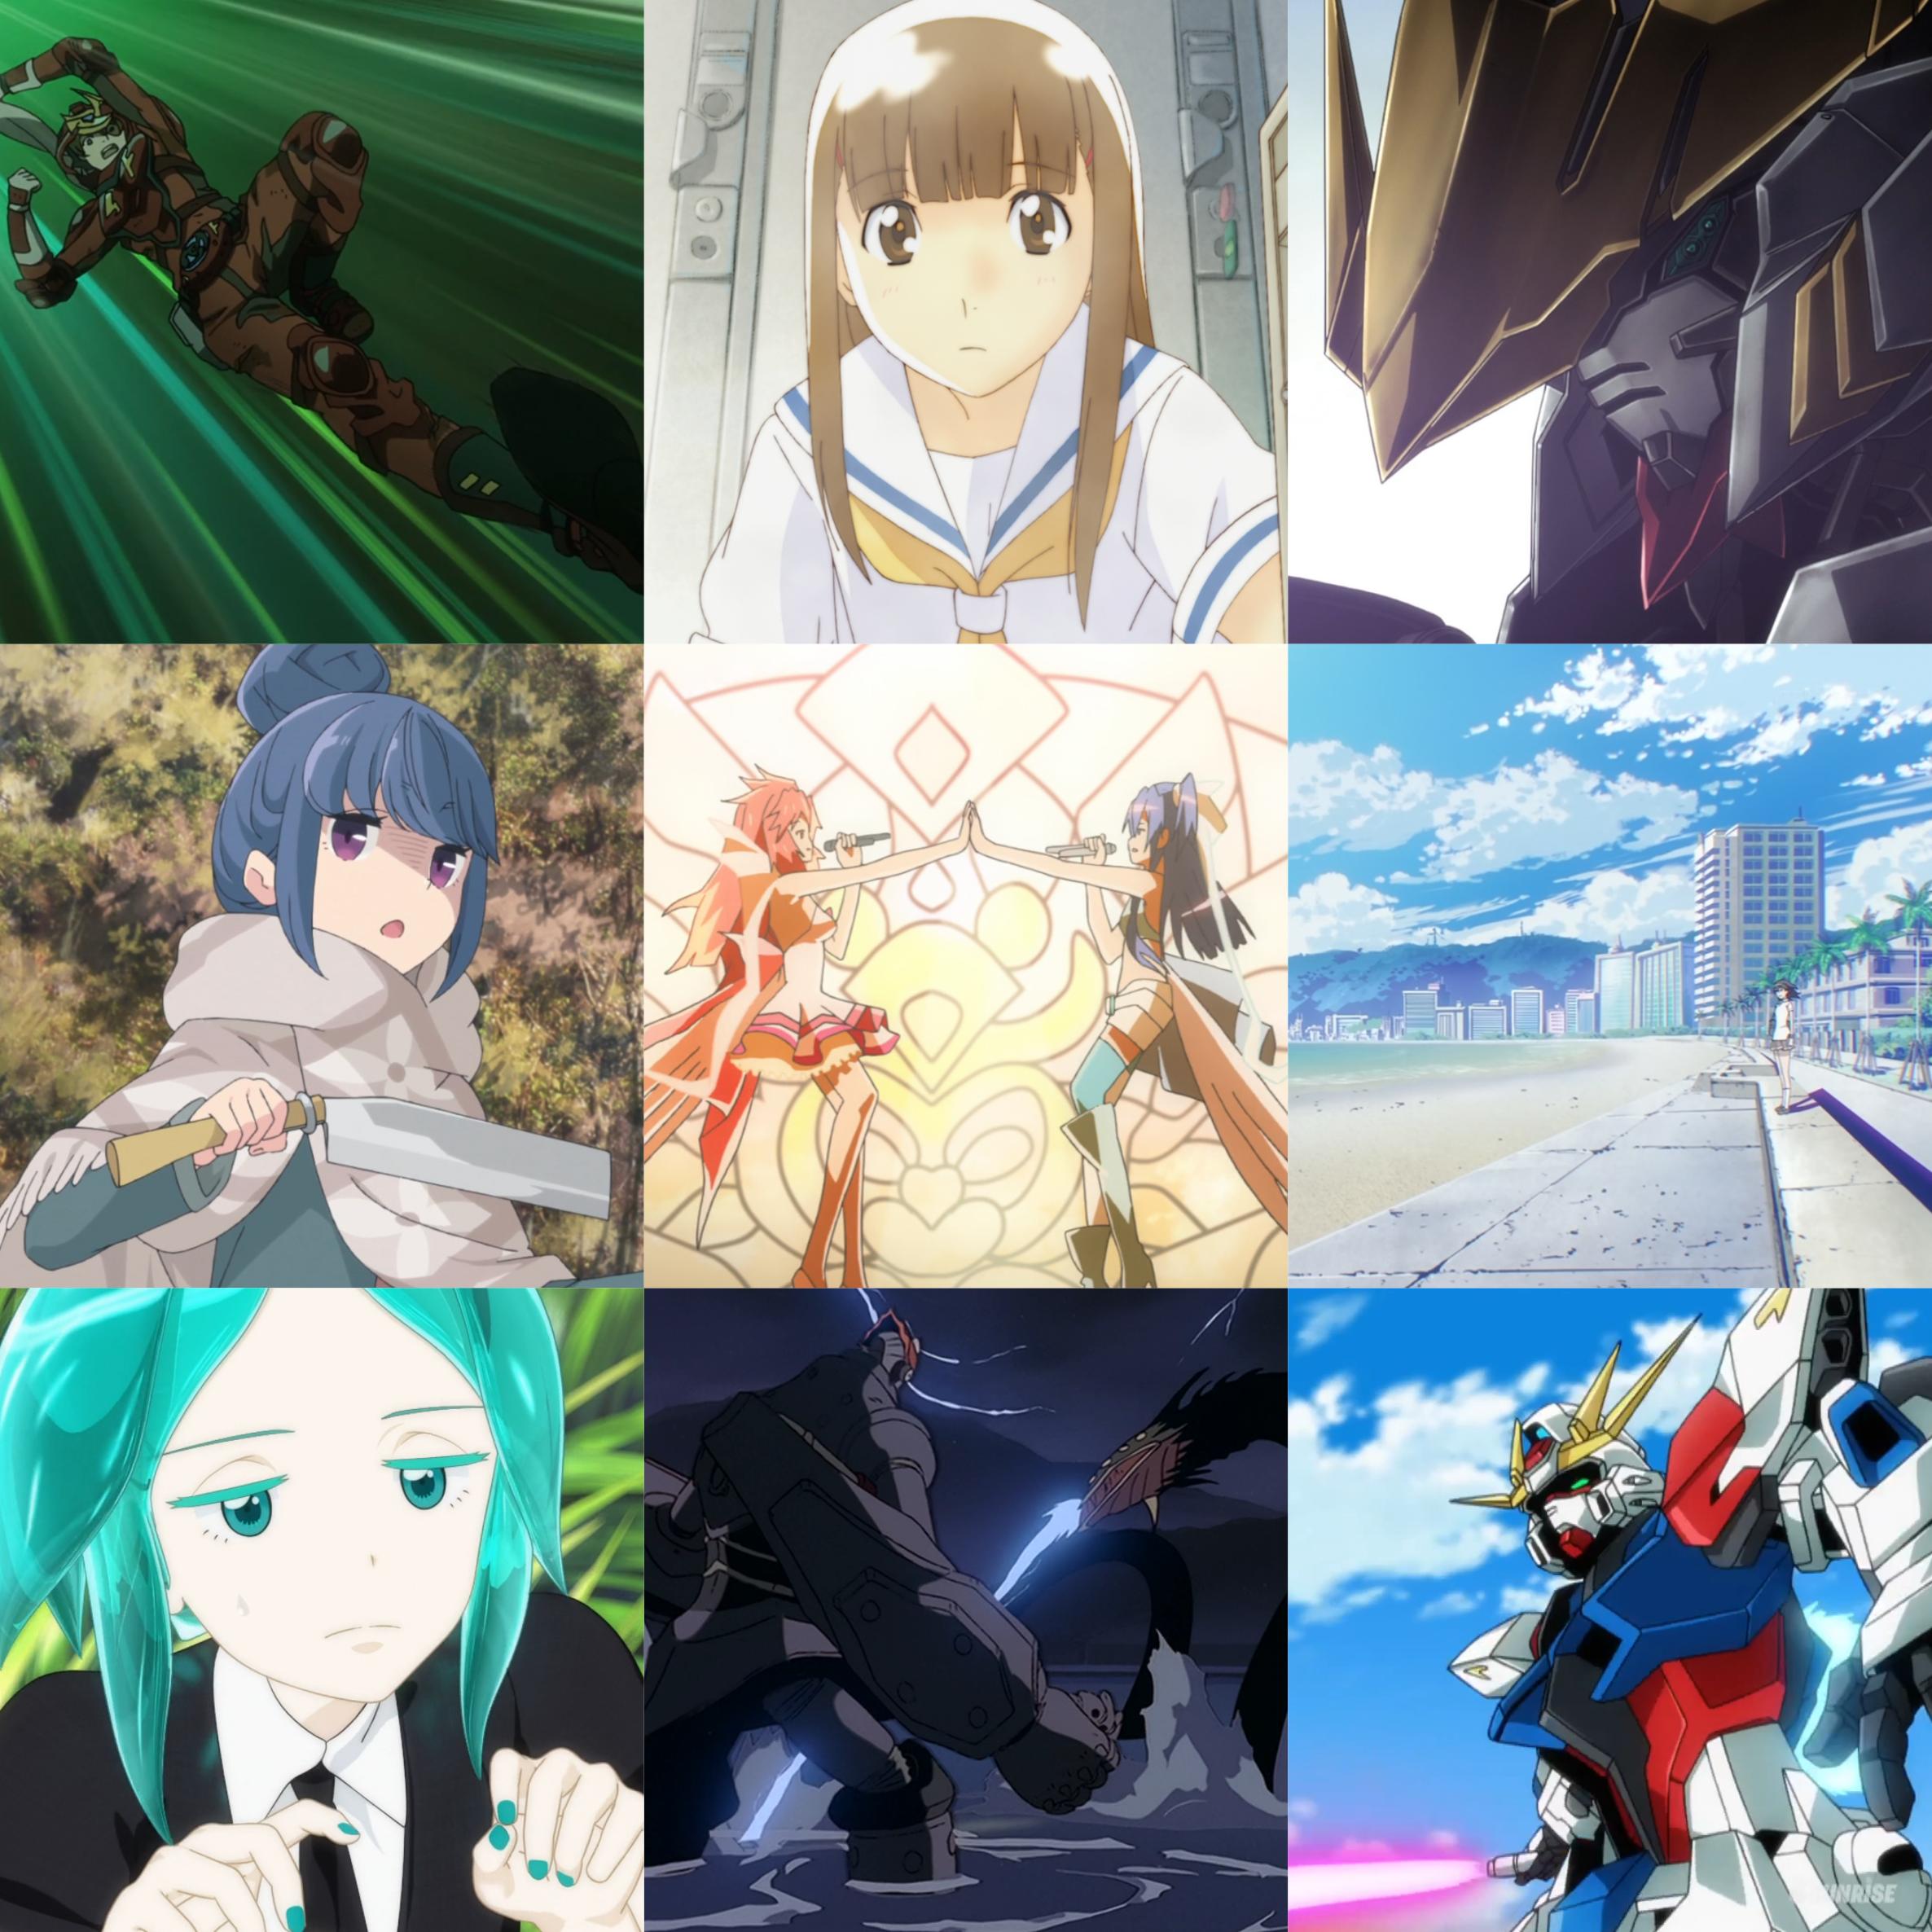 3x3 favourite anime - In order] and [3x3 least favourite anime that I've  completed - not in order] : r/MyAnimeList